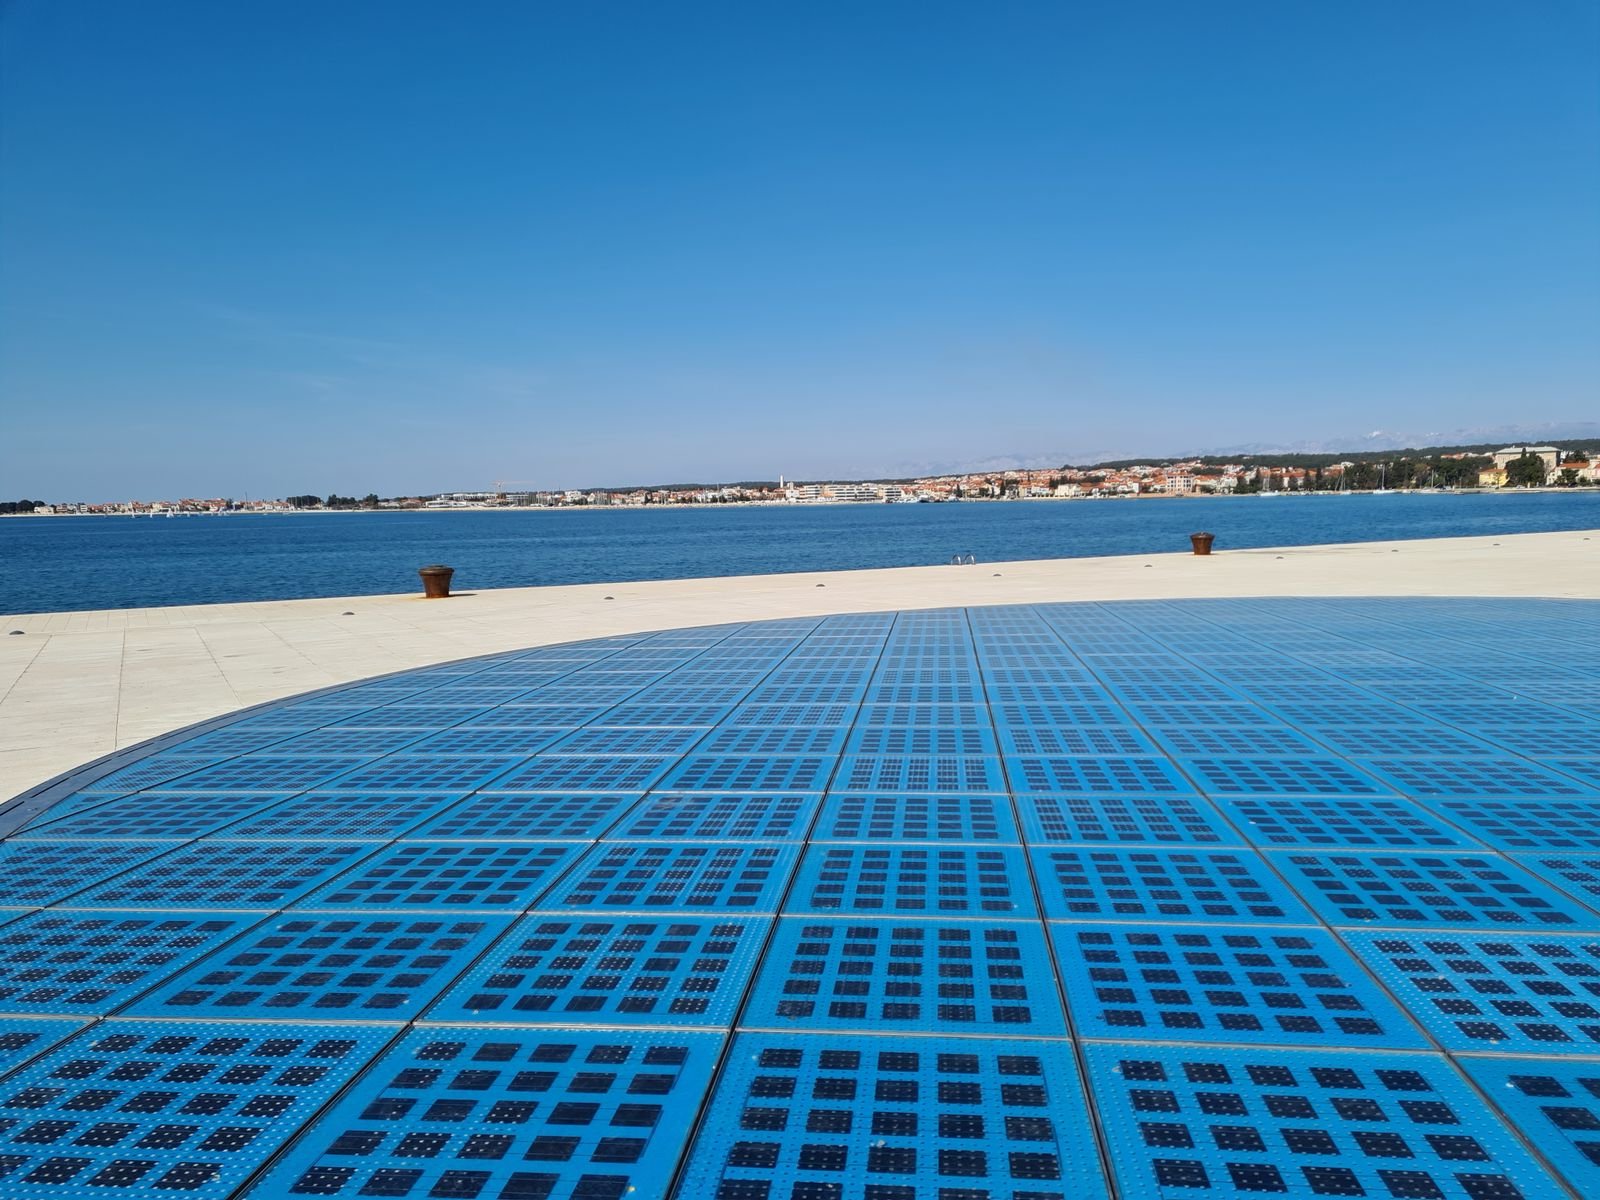 A large blue disc made up of solar panels on the ground close to the sea front